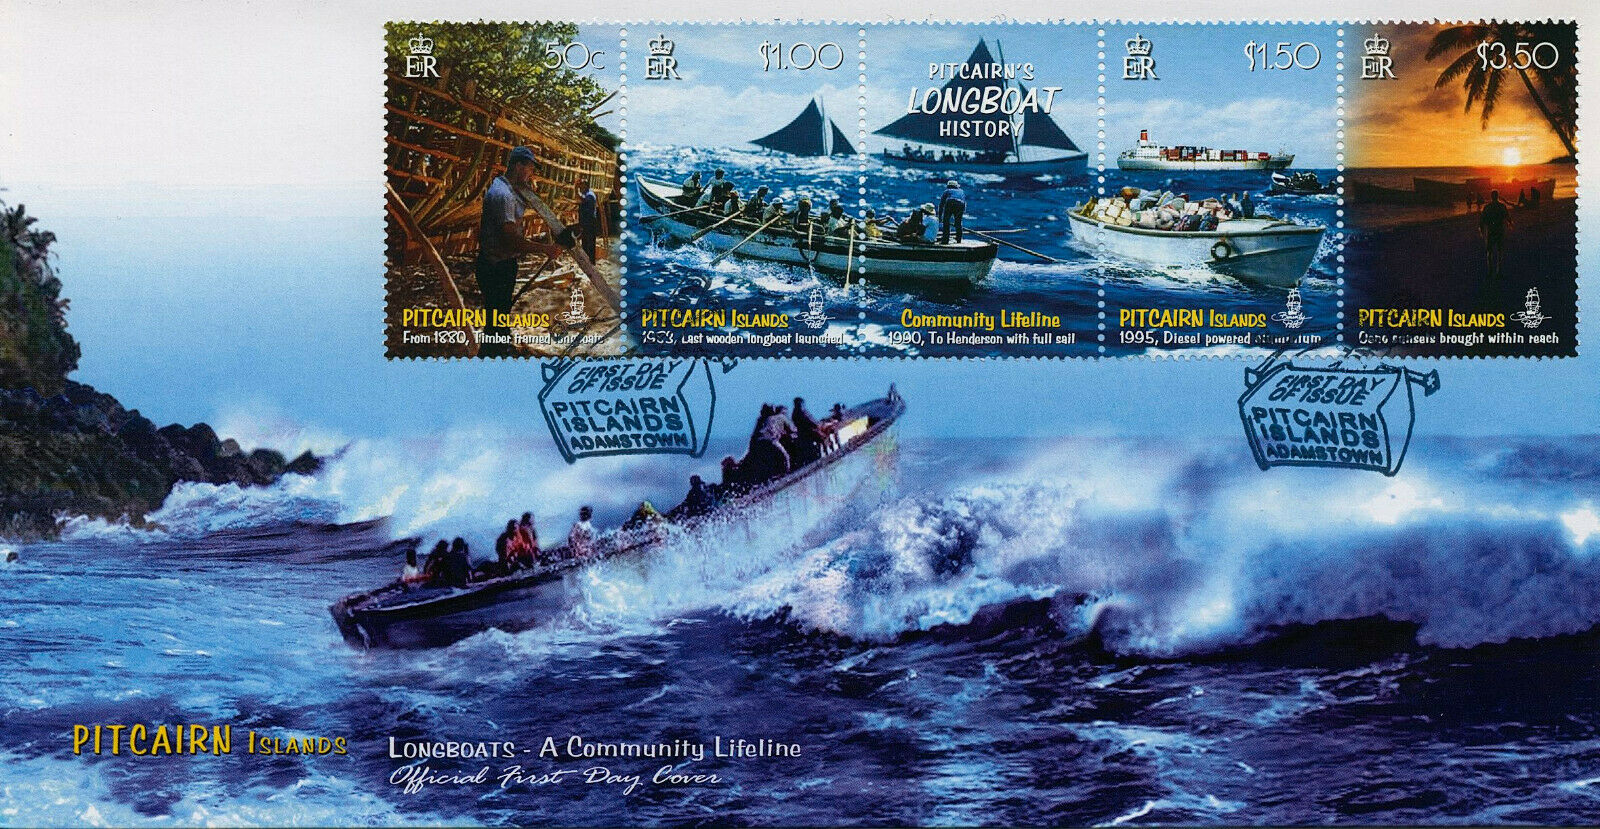 Pitcairn Islands 2008 FDC Nautical Stamps Pitcairn's Longboat History 4v Strip